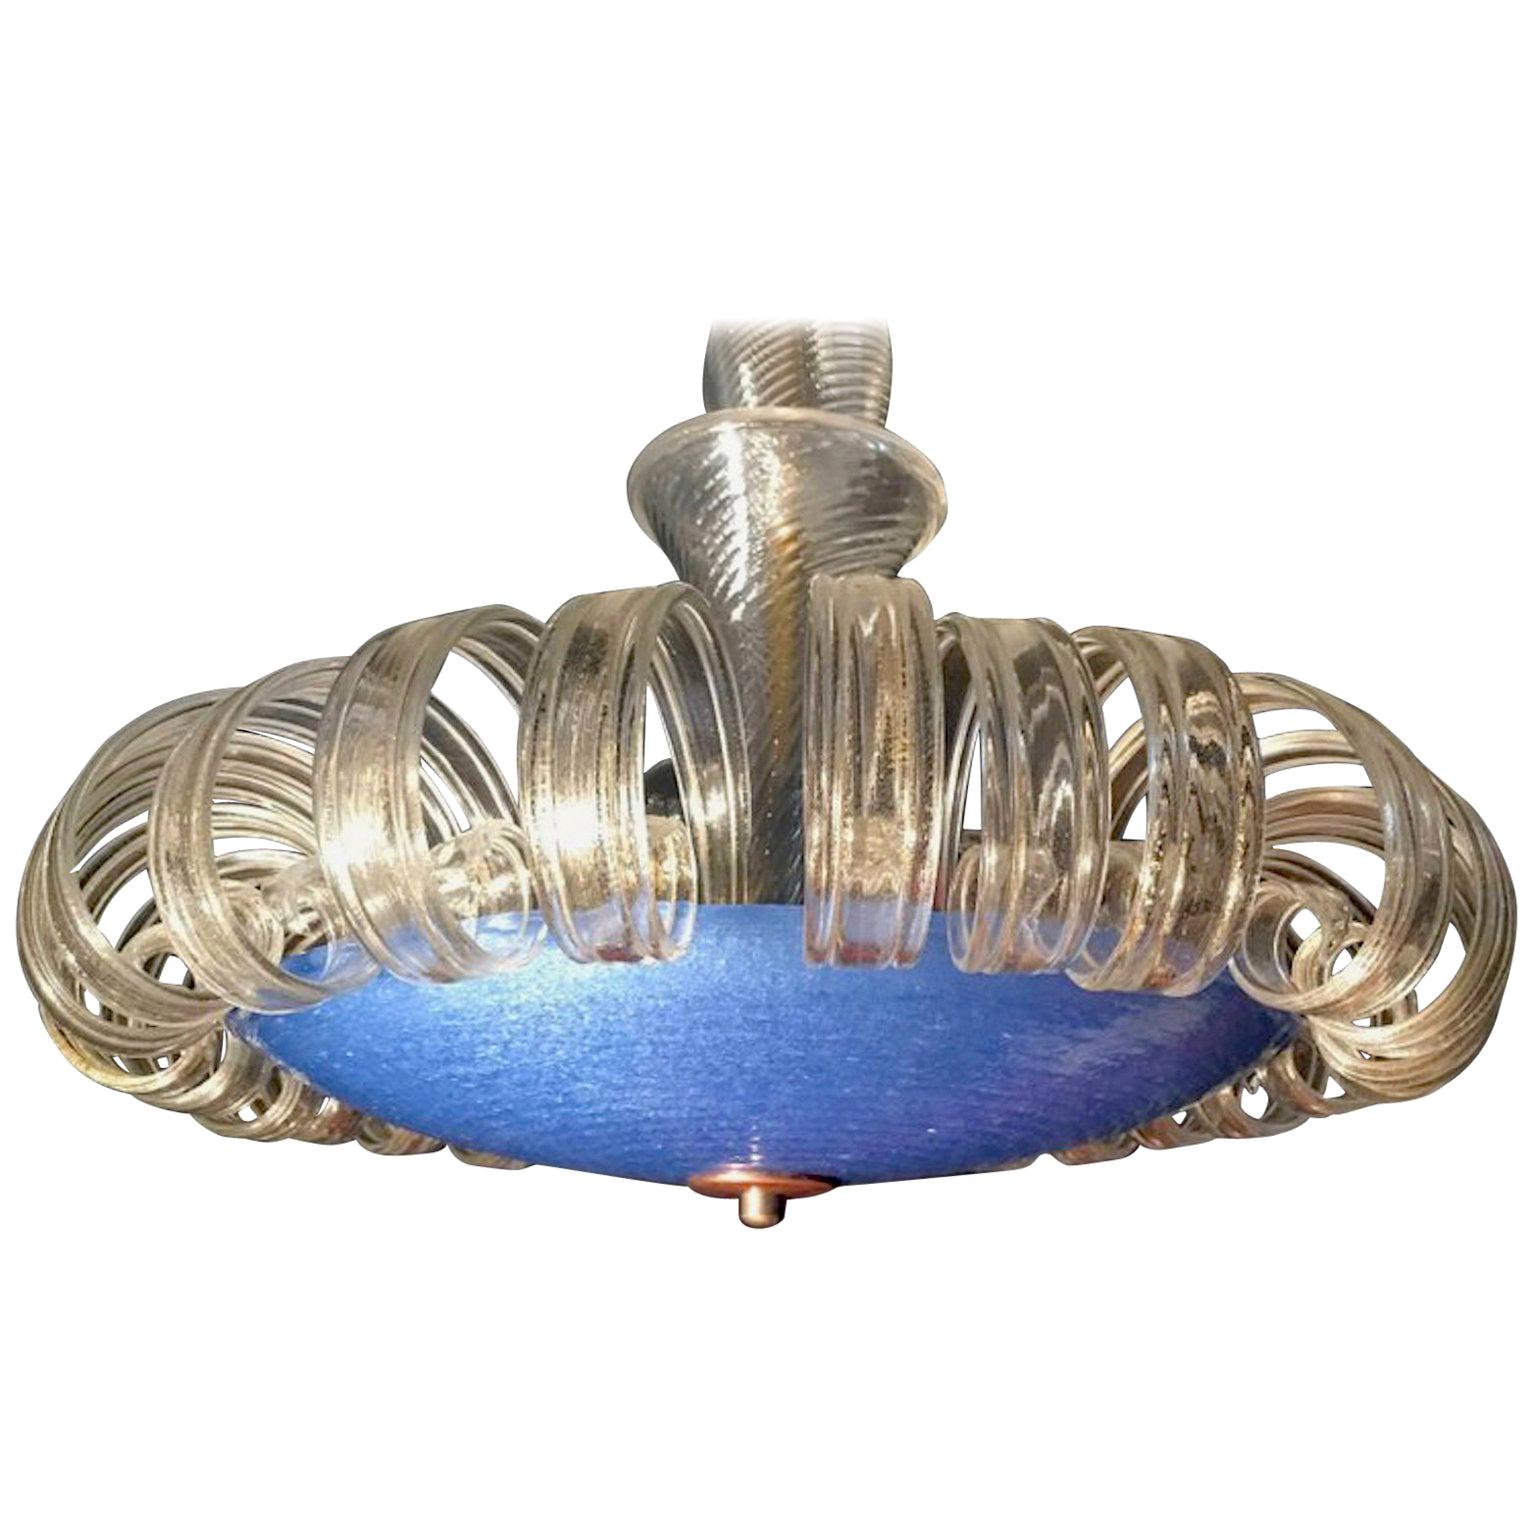 Midcentury Italian Glass Chandelier by Barovier & Toso, Murano, 1960 For Sale